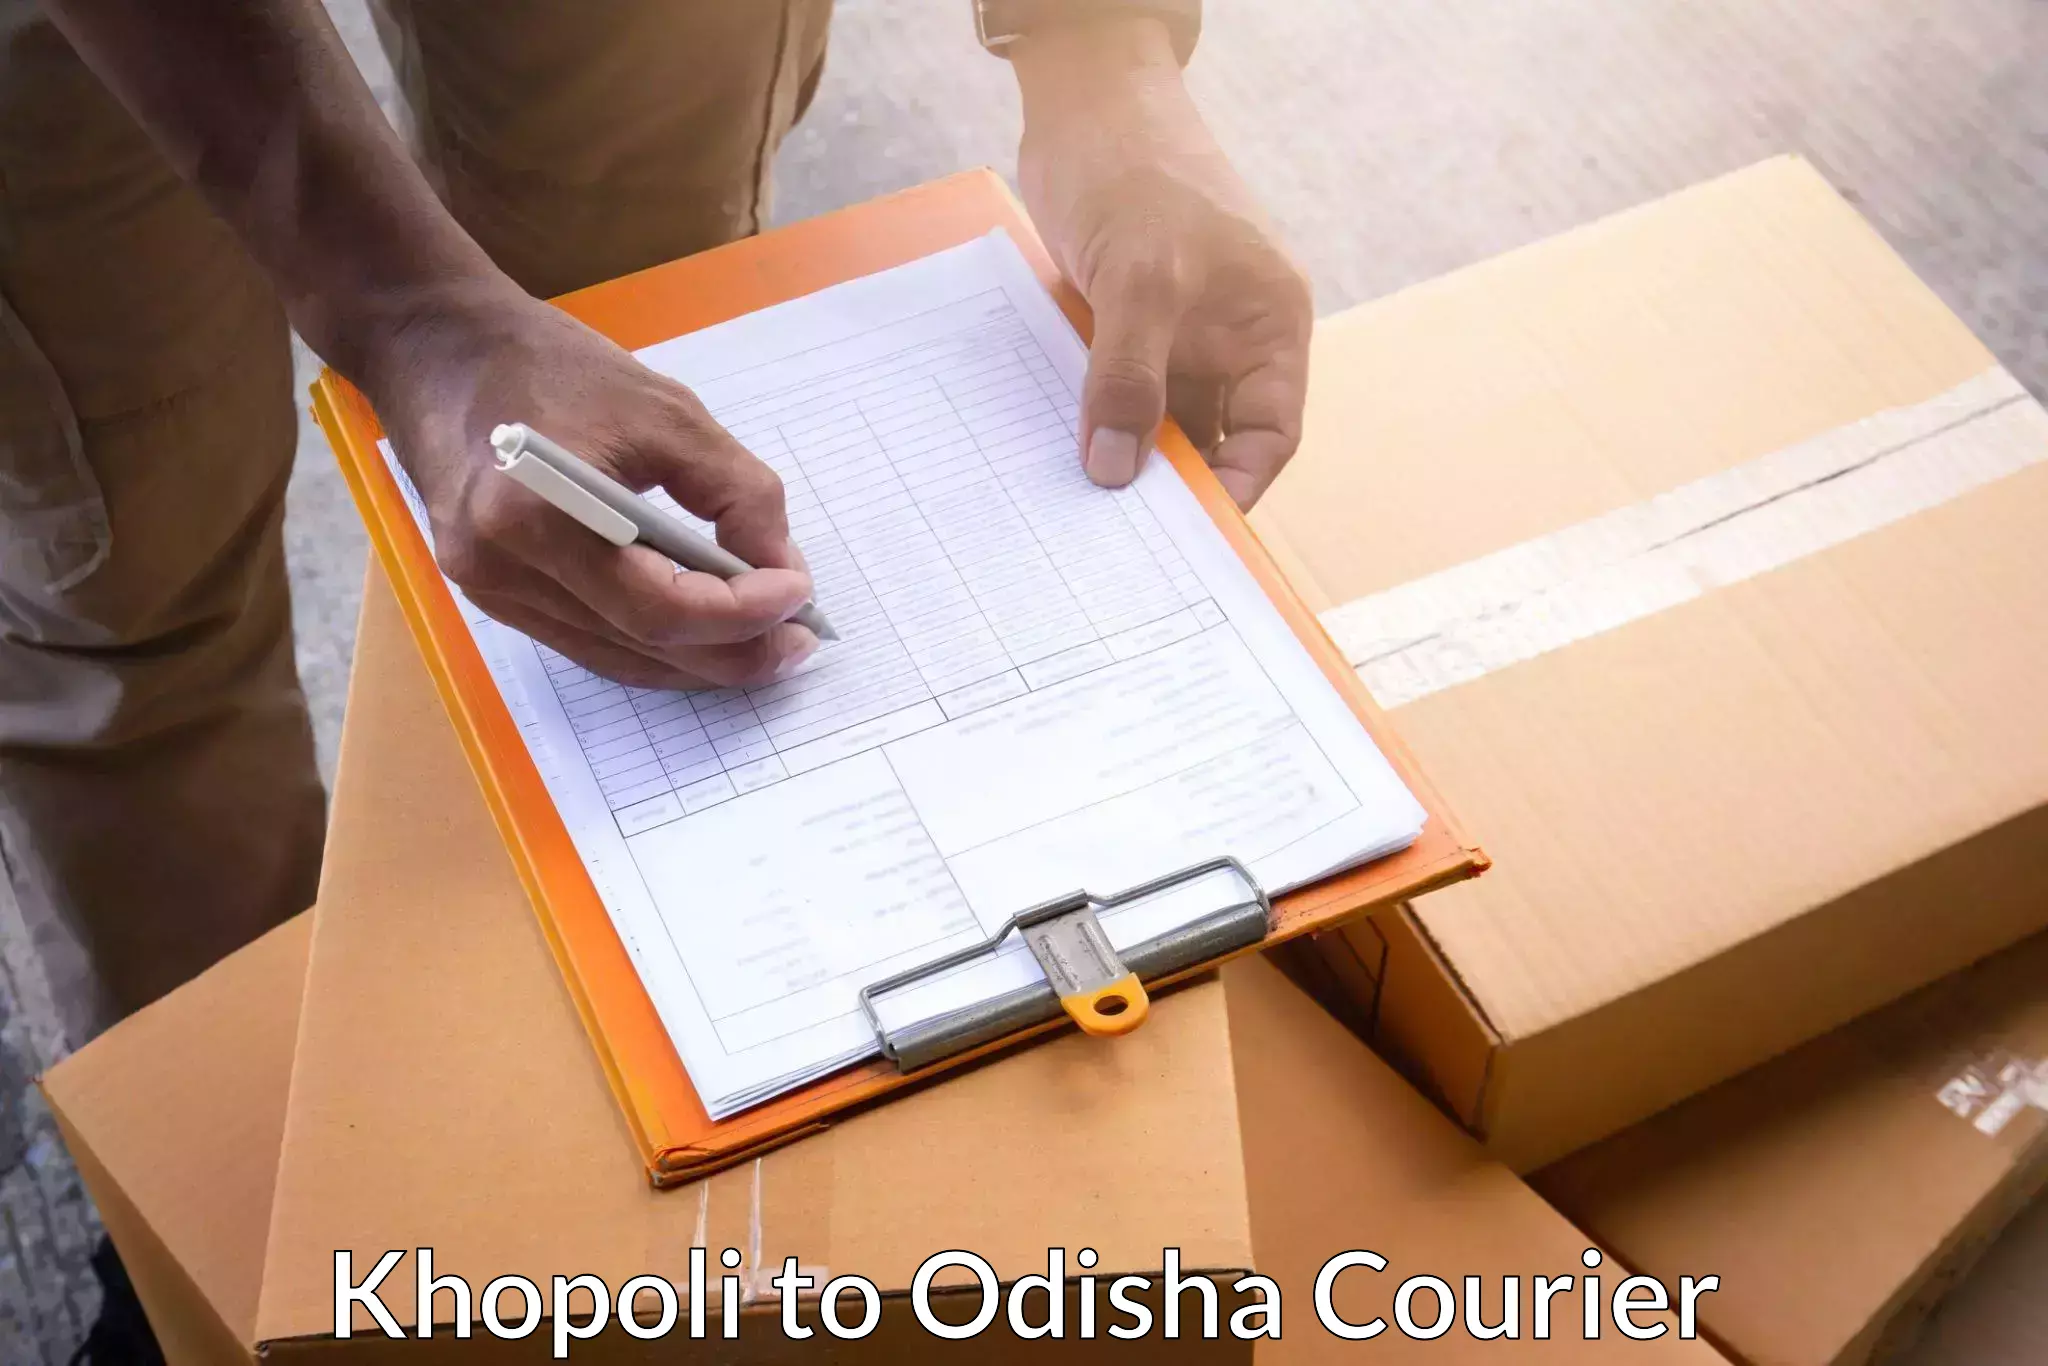 Personal parcel delivery in Khopoli to Umerkote